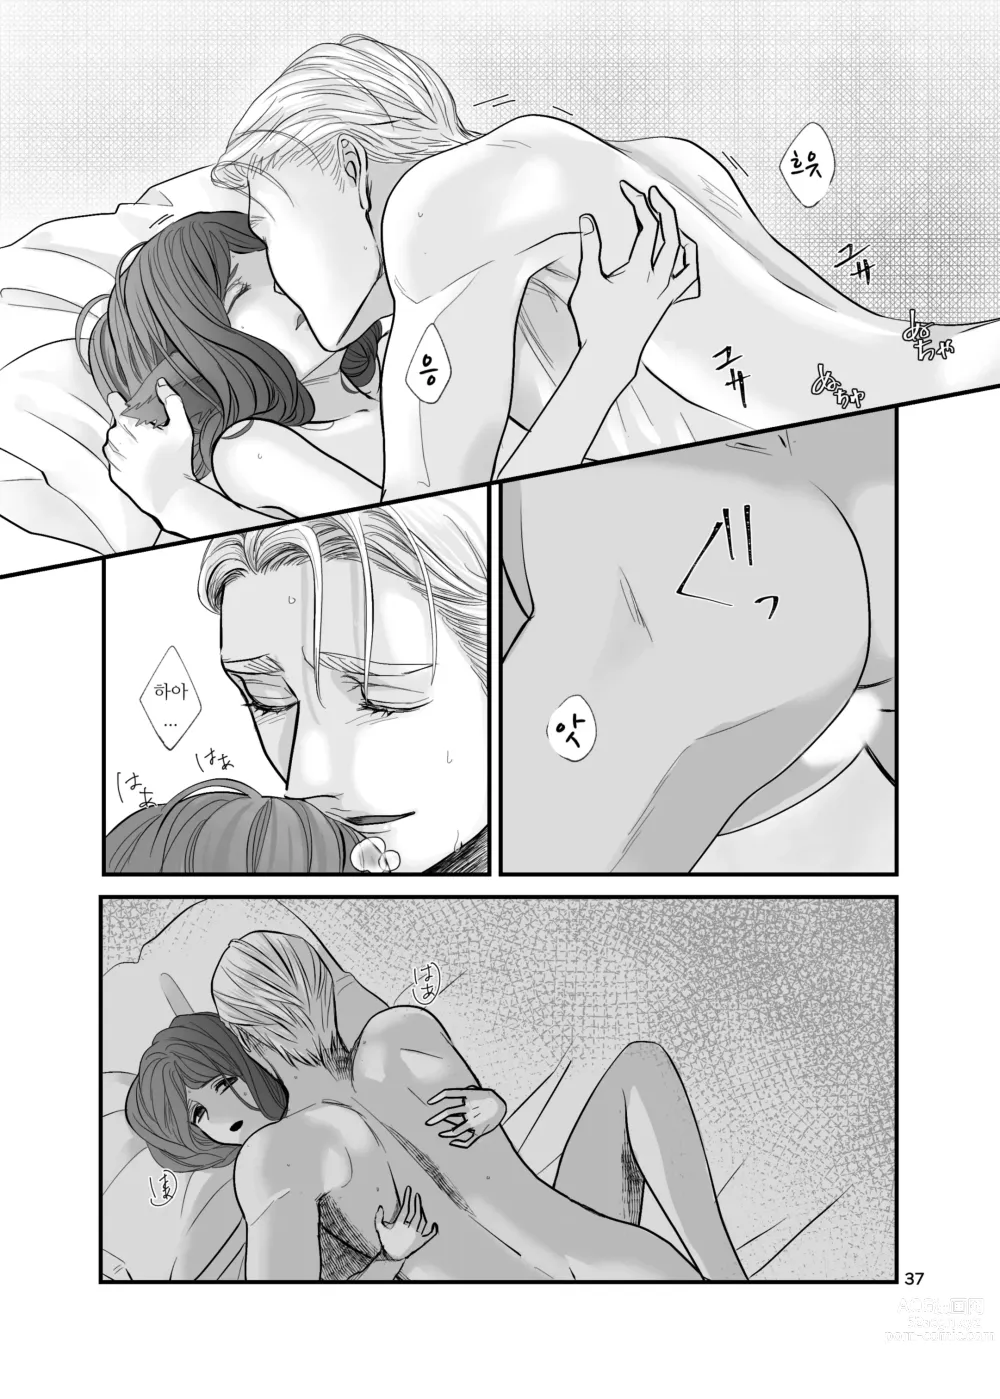 Page 37 of doujinshi 수인 영애와 혼약자